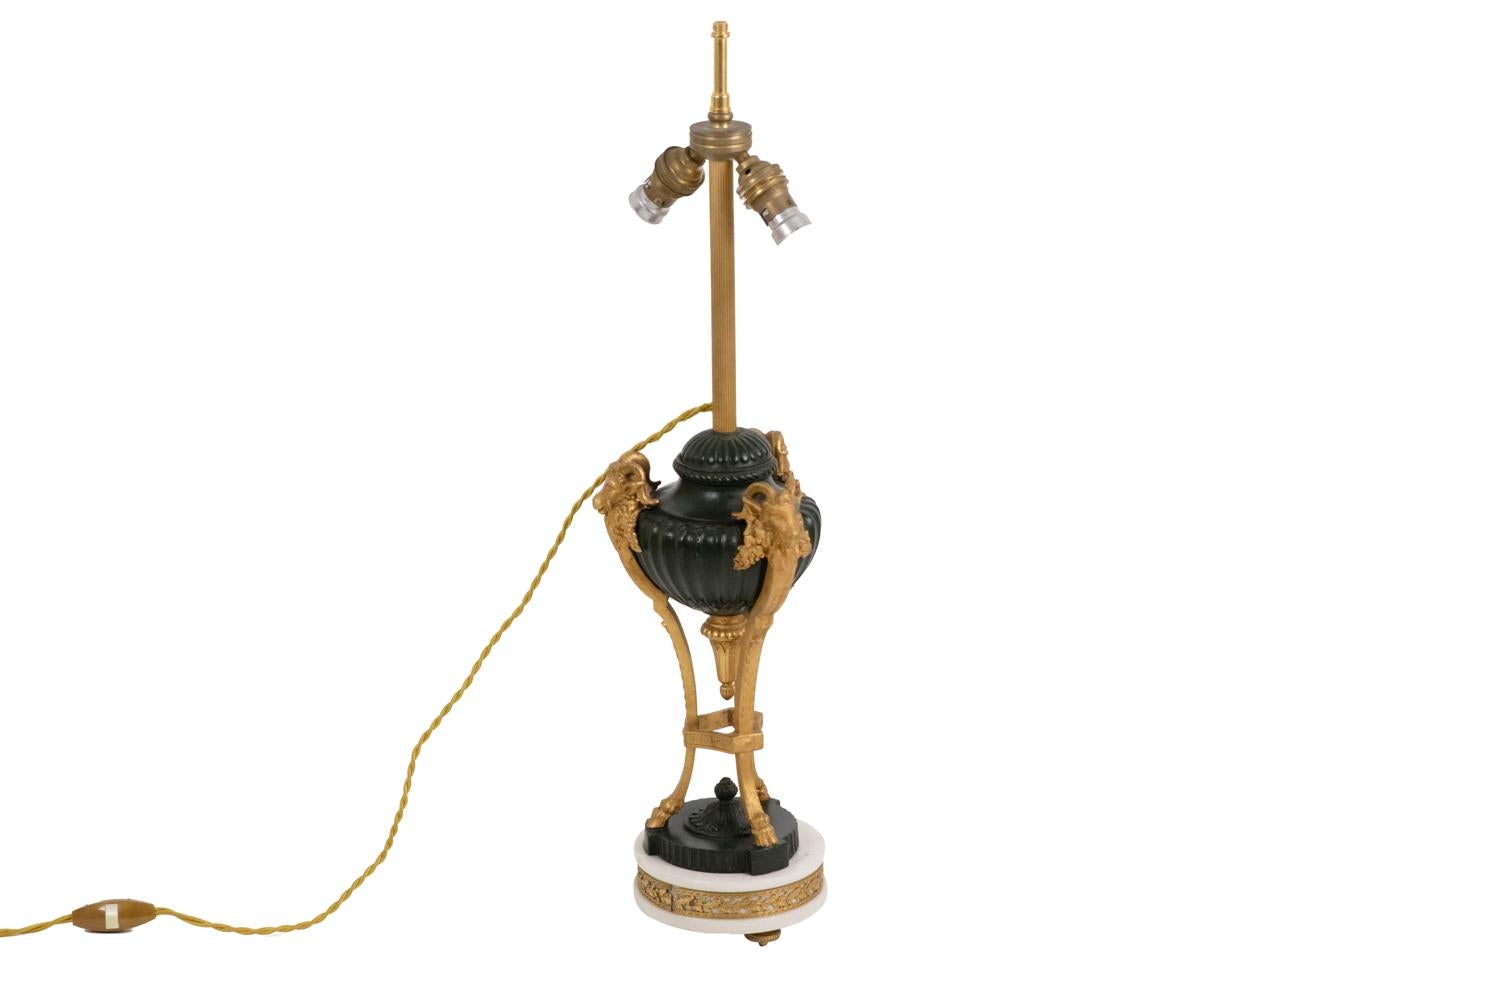 Empire style lamp in two patinas bronze in cassolette shape decorated with gadroons and surrounded with three ram heads finished by hoofs. Cassolette topped by a fluted shaft and finished by a tulip shape decorated with leaves and